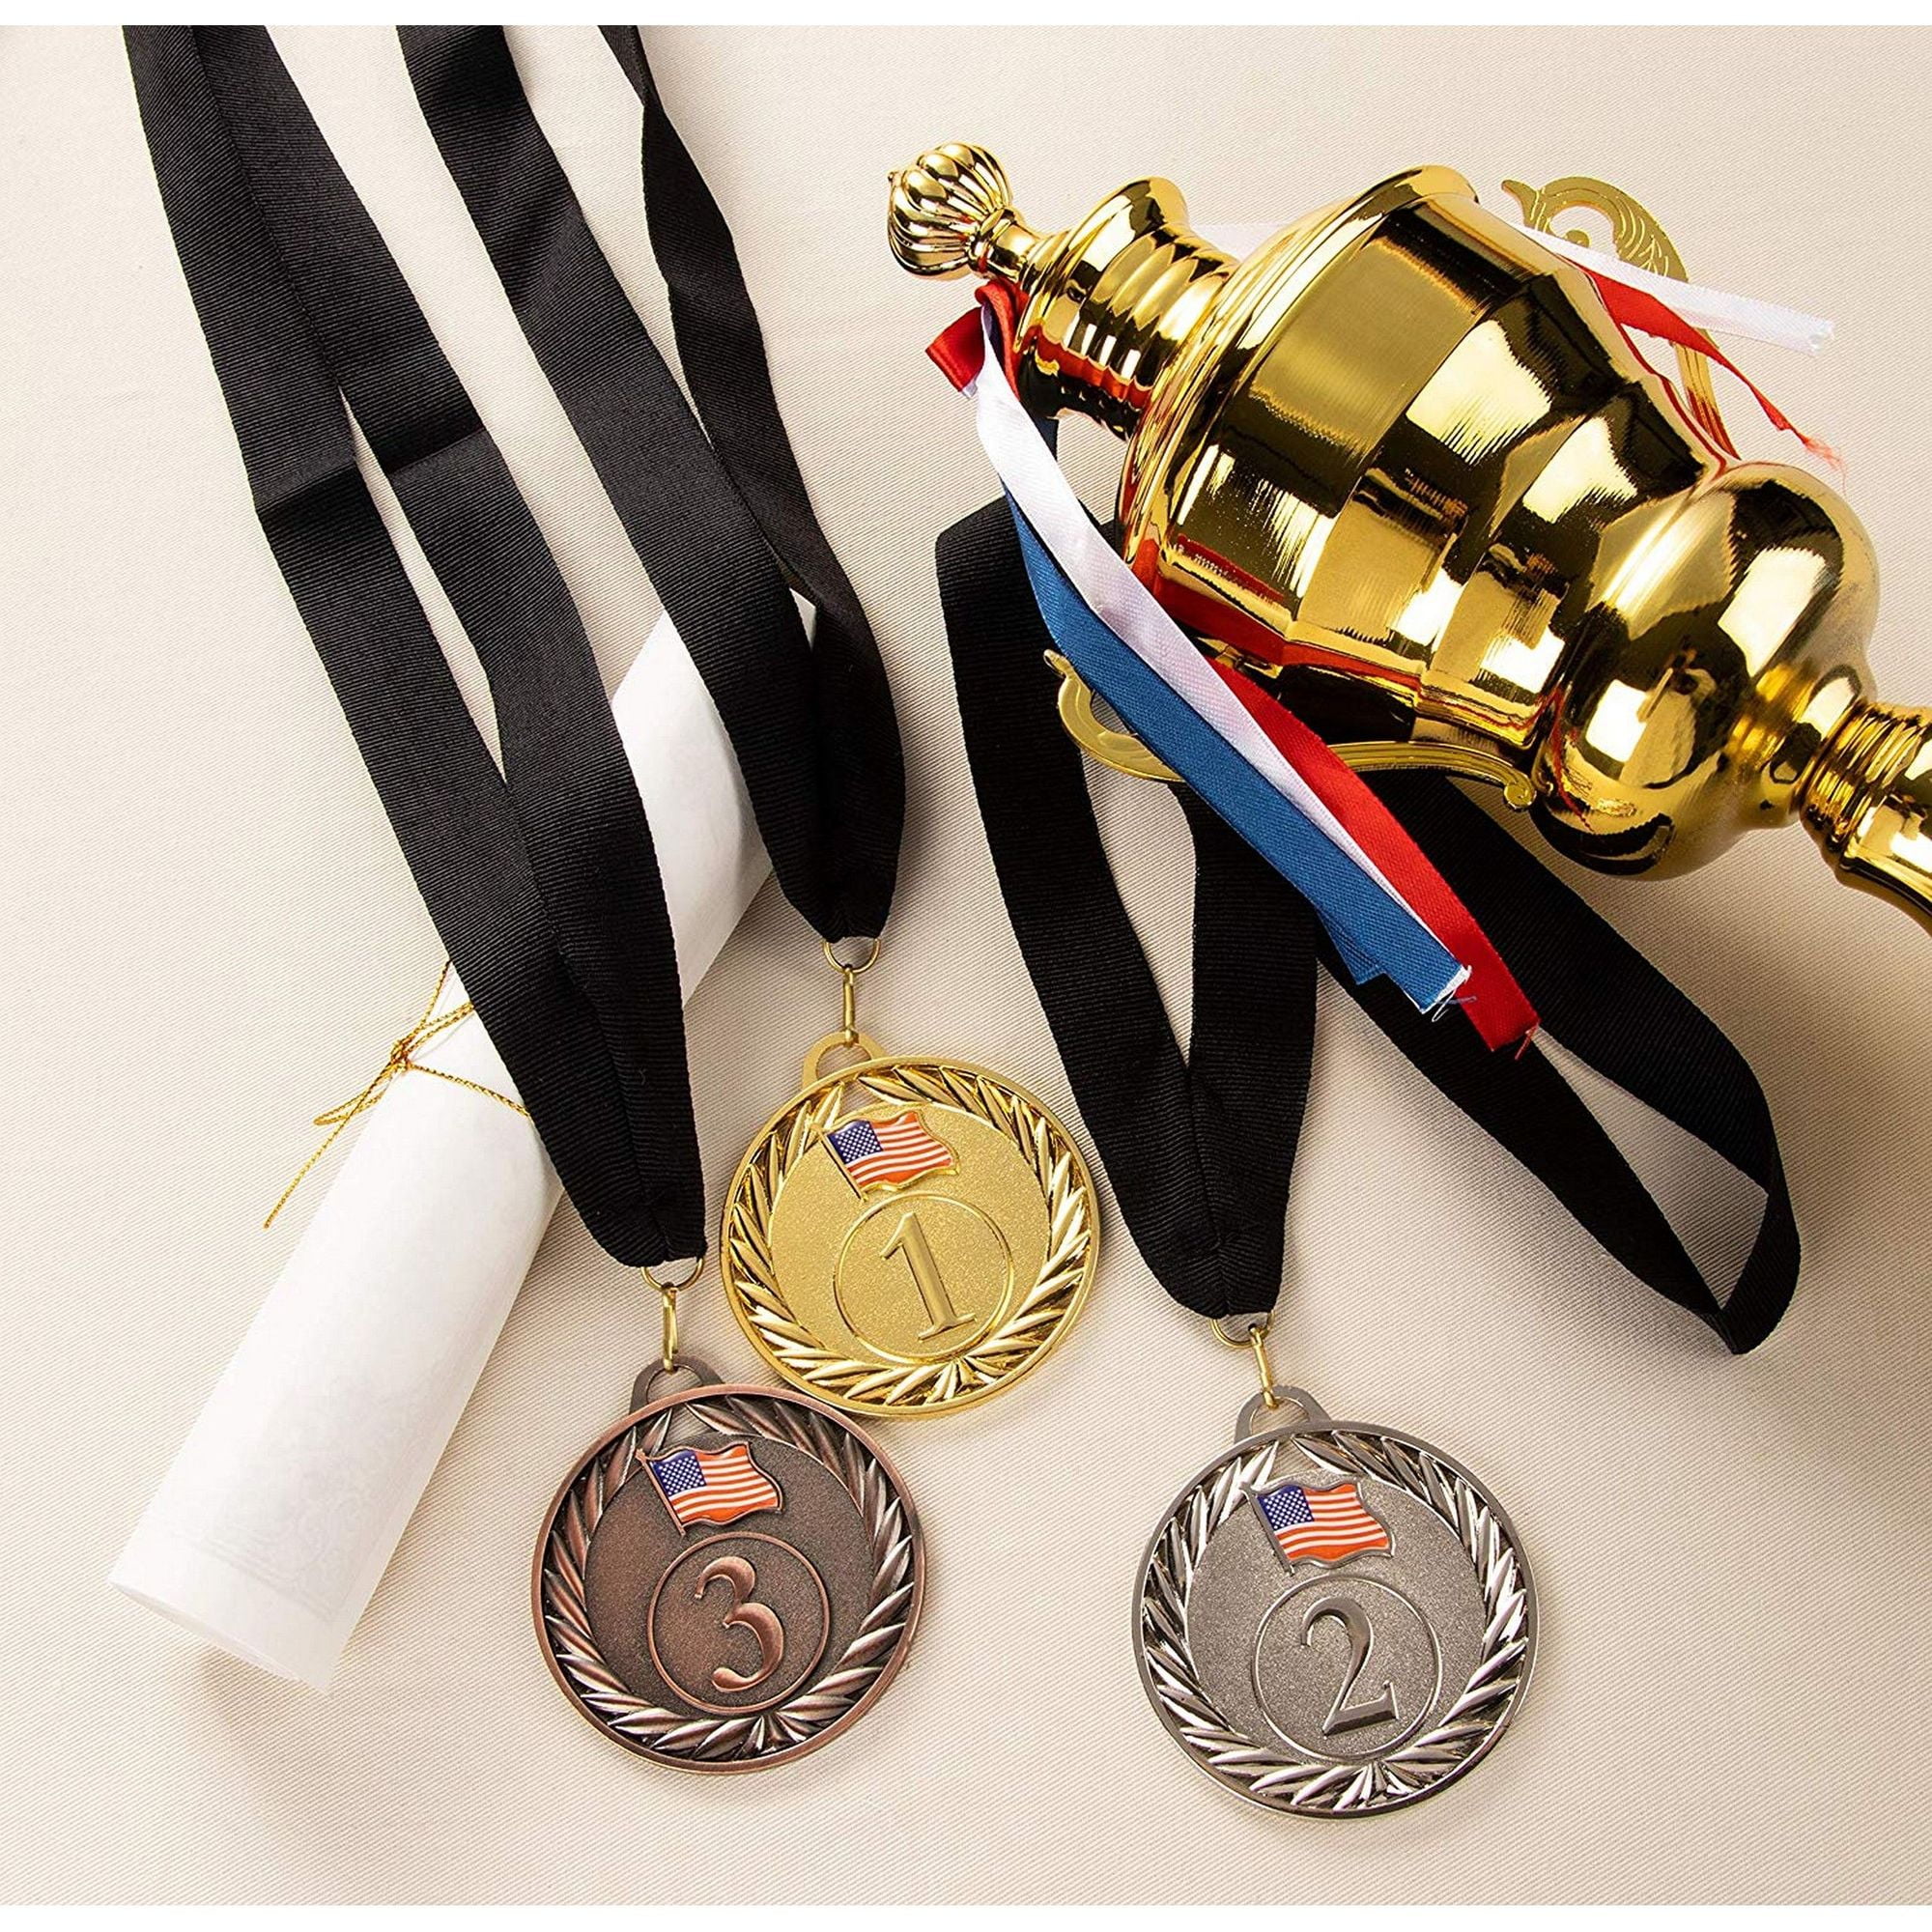 Express Medals Various 10 Pack Styles of Softball Award Medals with Neck Ribbons Trophy Award Prize Gift 